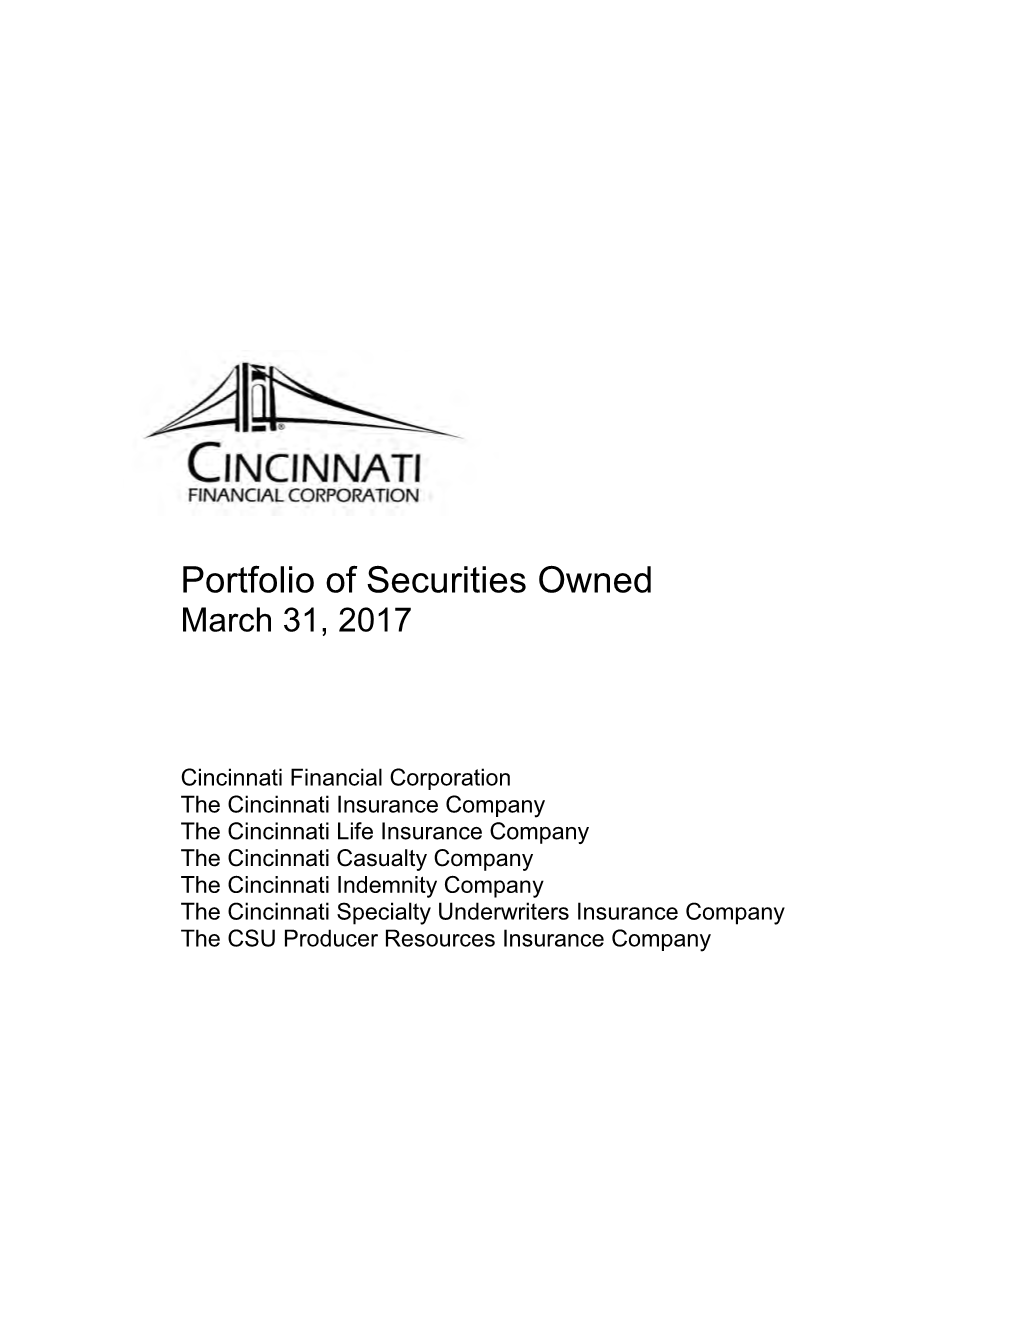 Portfolio of Securities Owned March 31, 2017